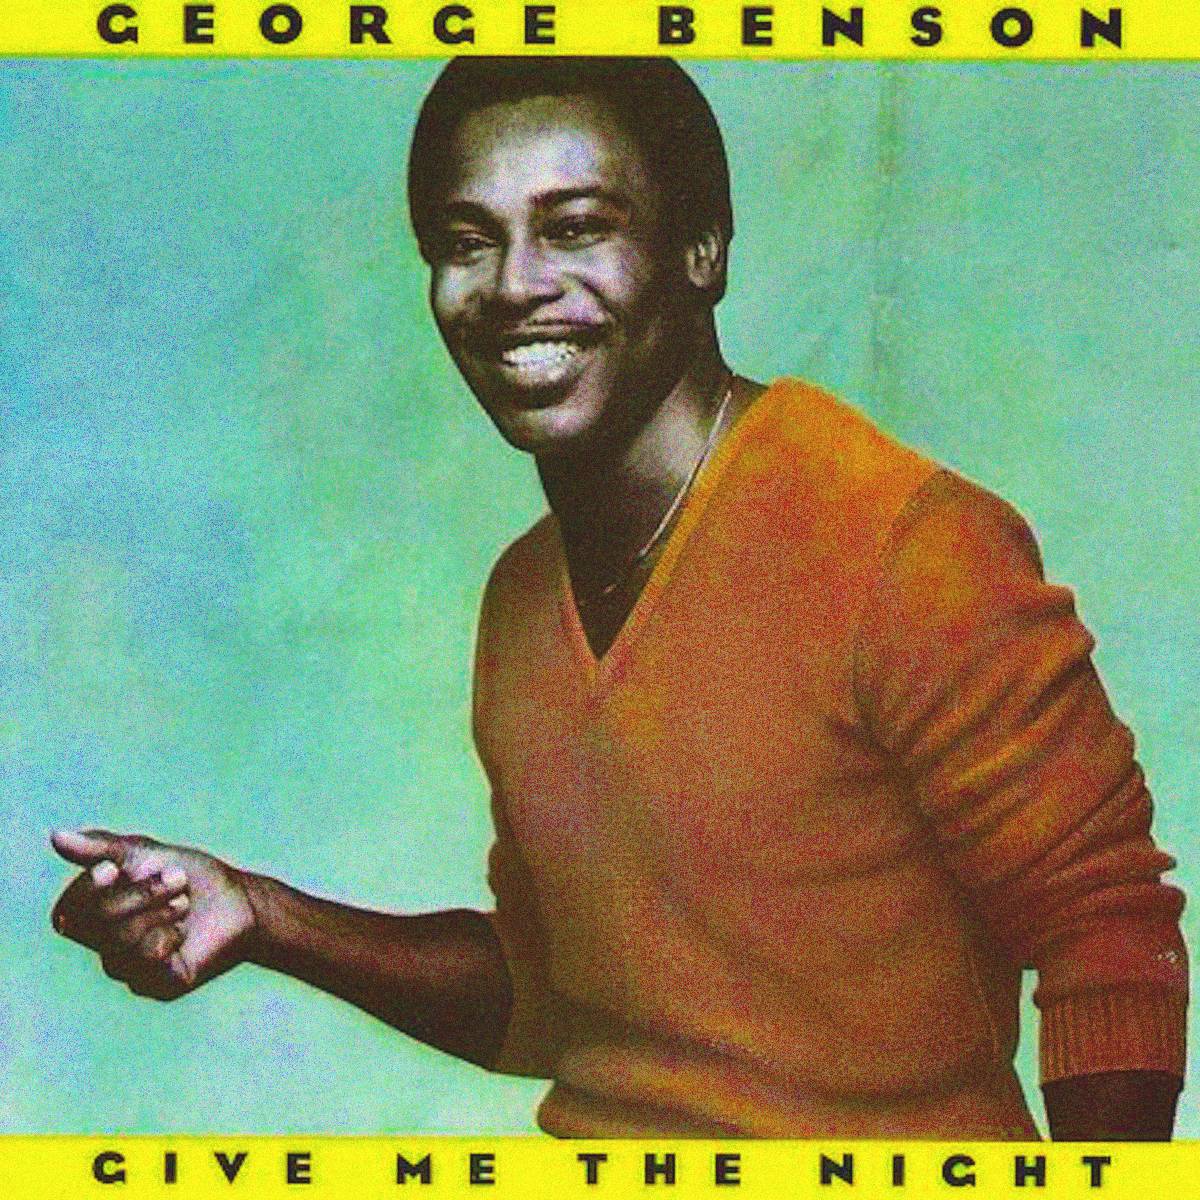 Give Me the Night album cover (George Benson)